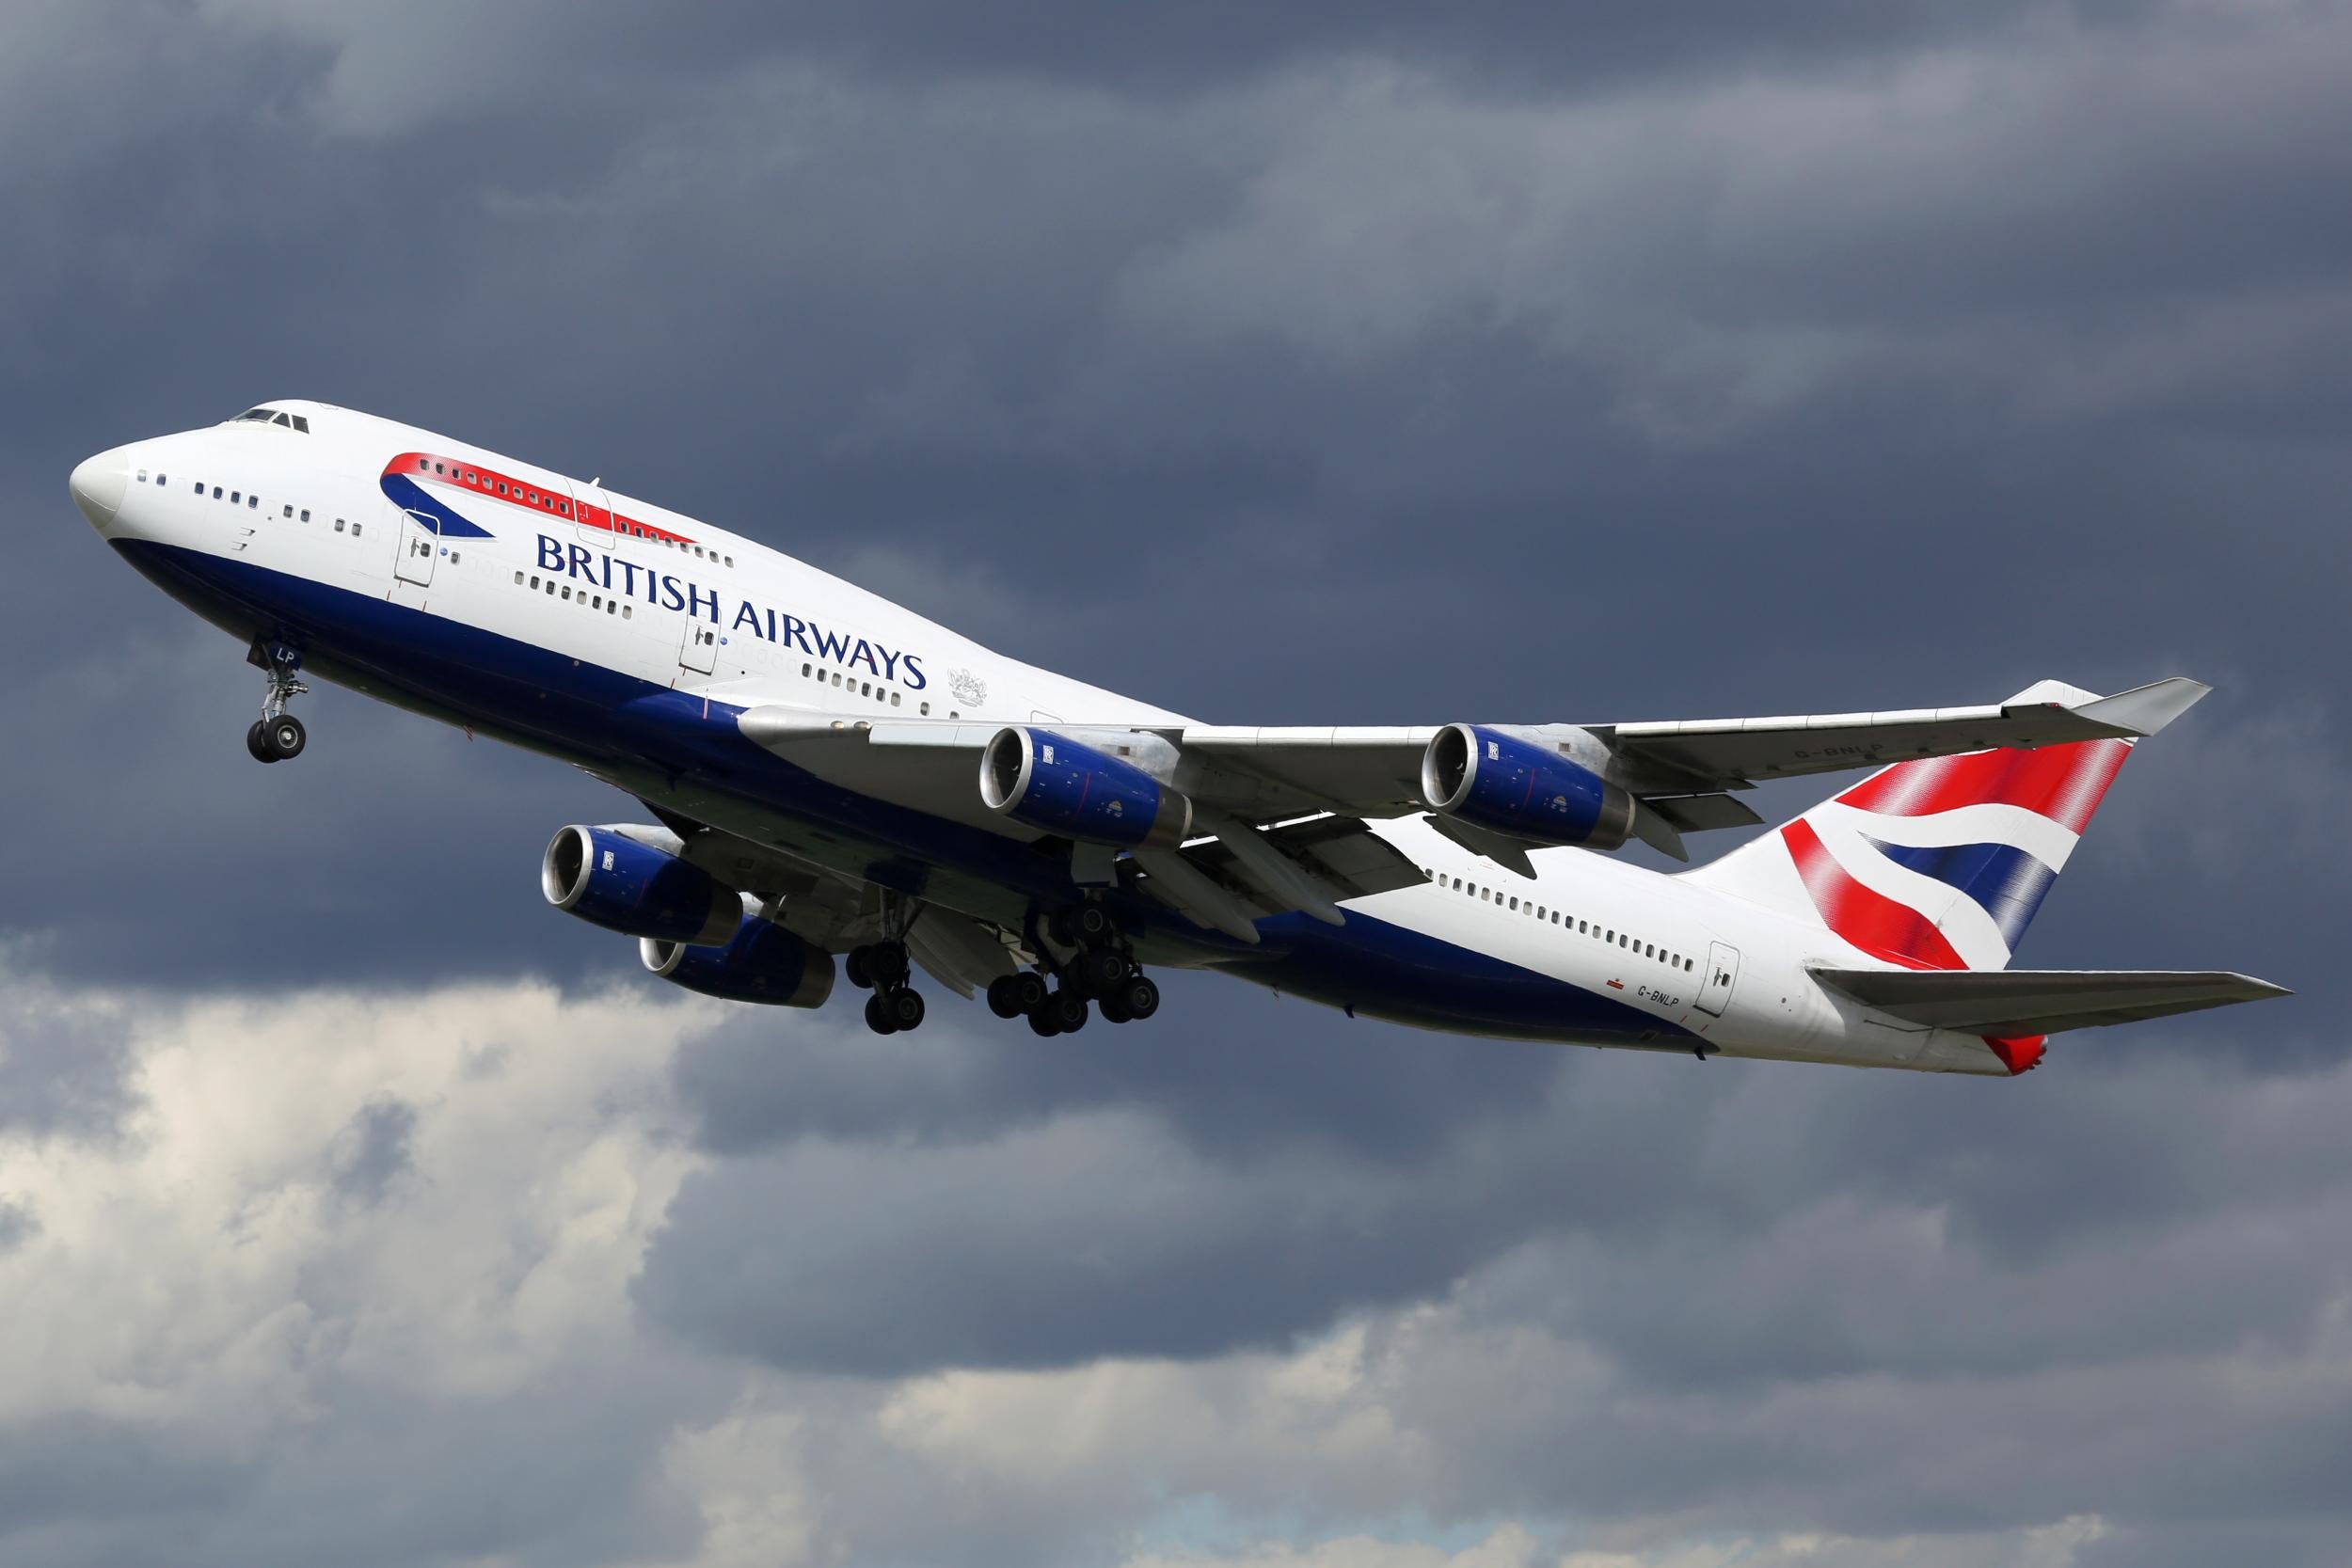 British Airways is the flag carrier airline of the UK